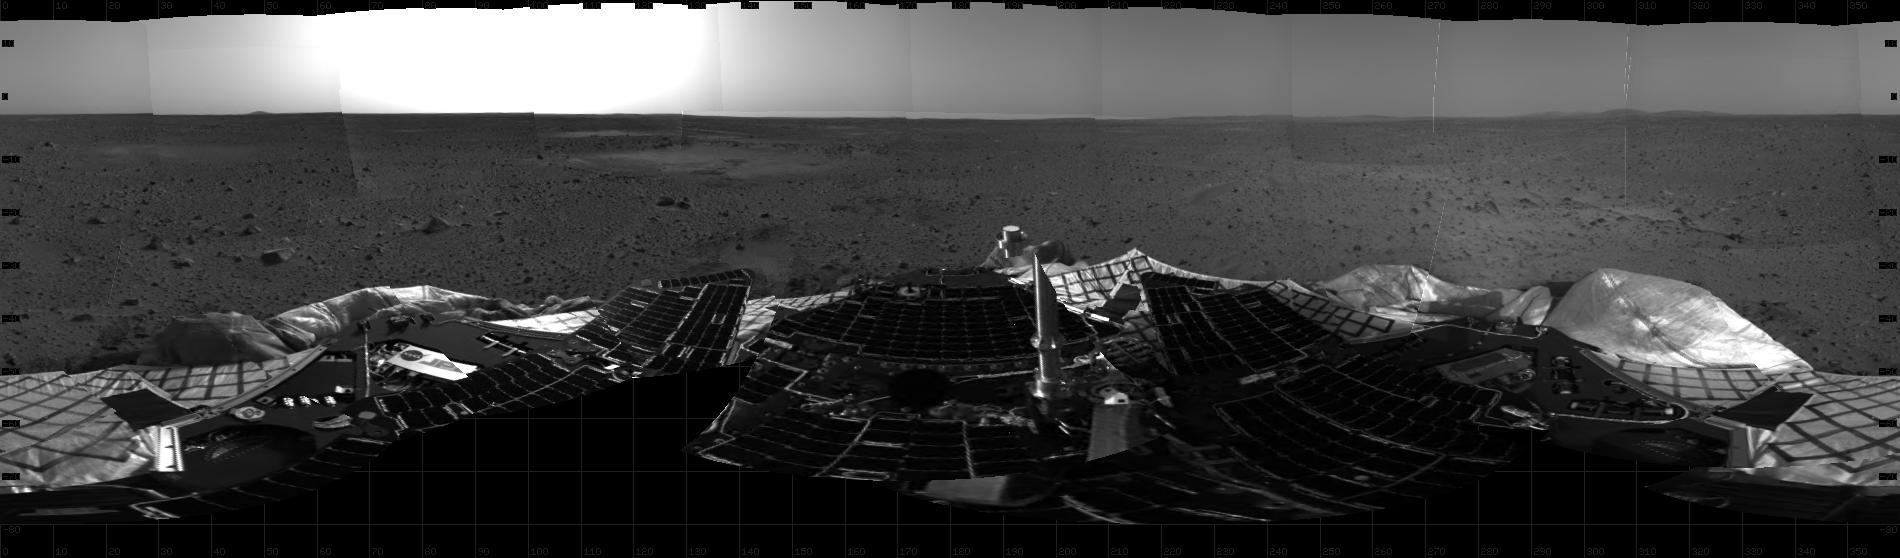 Twelve Years Ago, Spirit Rover Lands on Mars . This mosaic image taken on Jan. 4, 2004, by the navigation camera on the Mars Exploration Rover Spirit, shows a 360 degree panoramic view of the rover on the surface of Mars.   Spirit operated for more than six years after landing in January 2004 for what was planned as a three-month mission. Credit: NASA/JPL